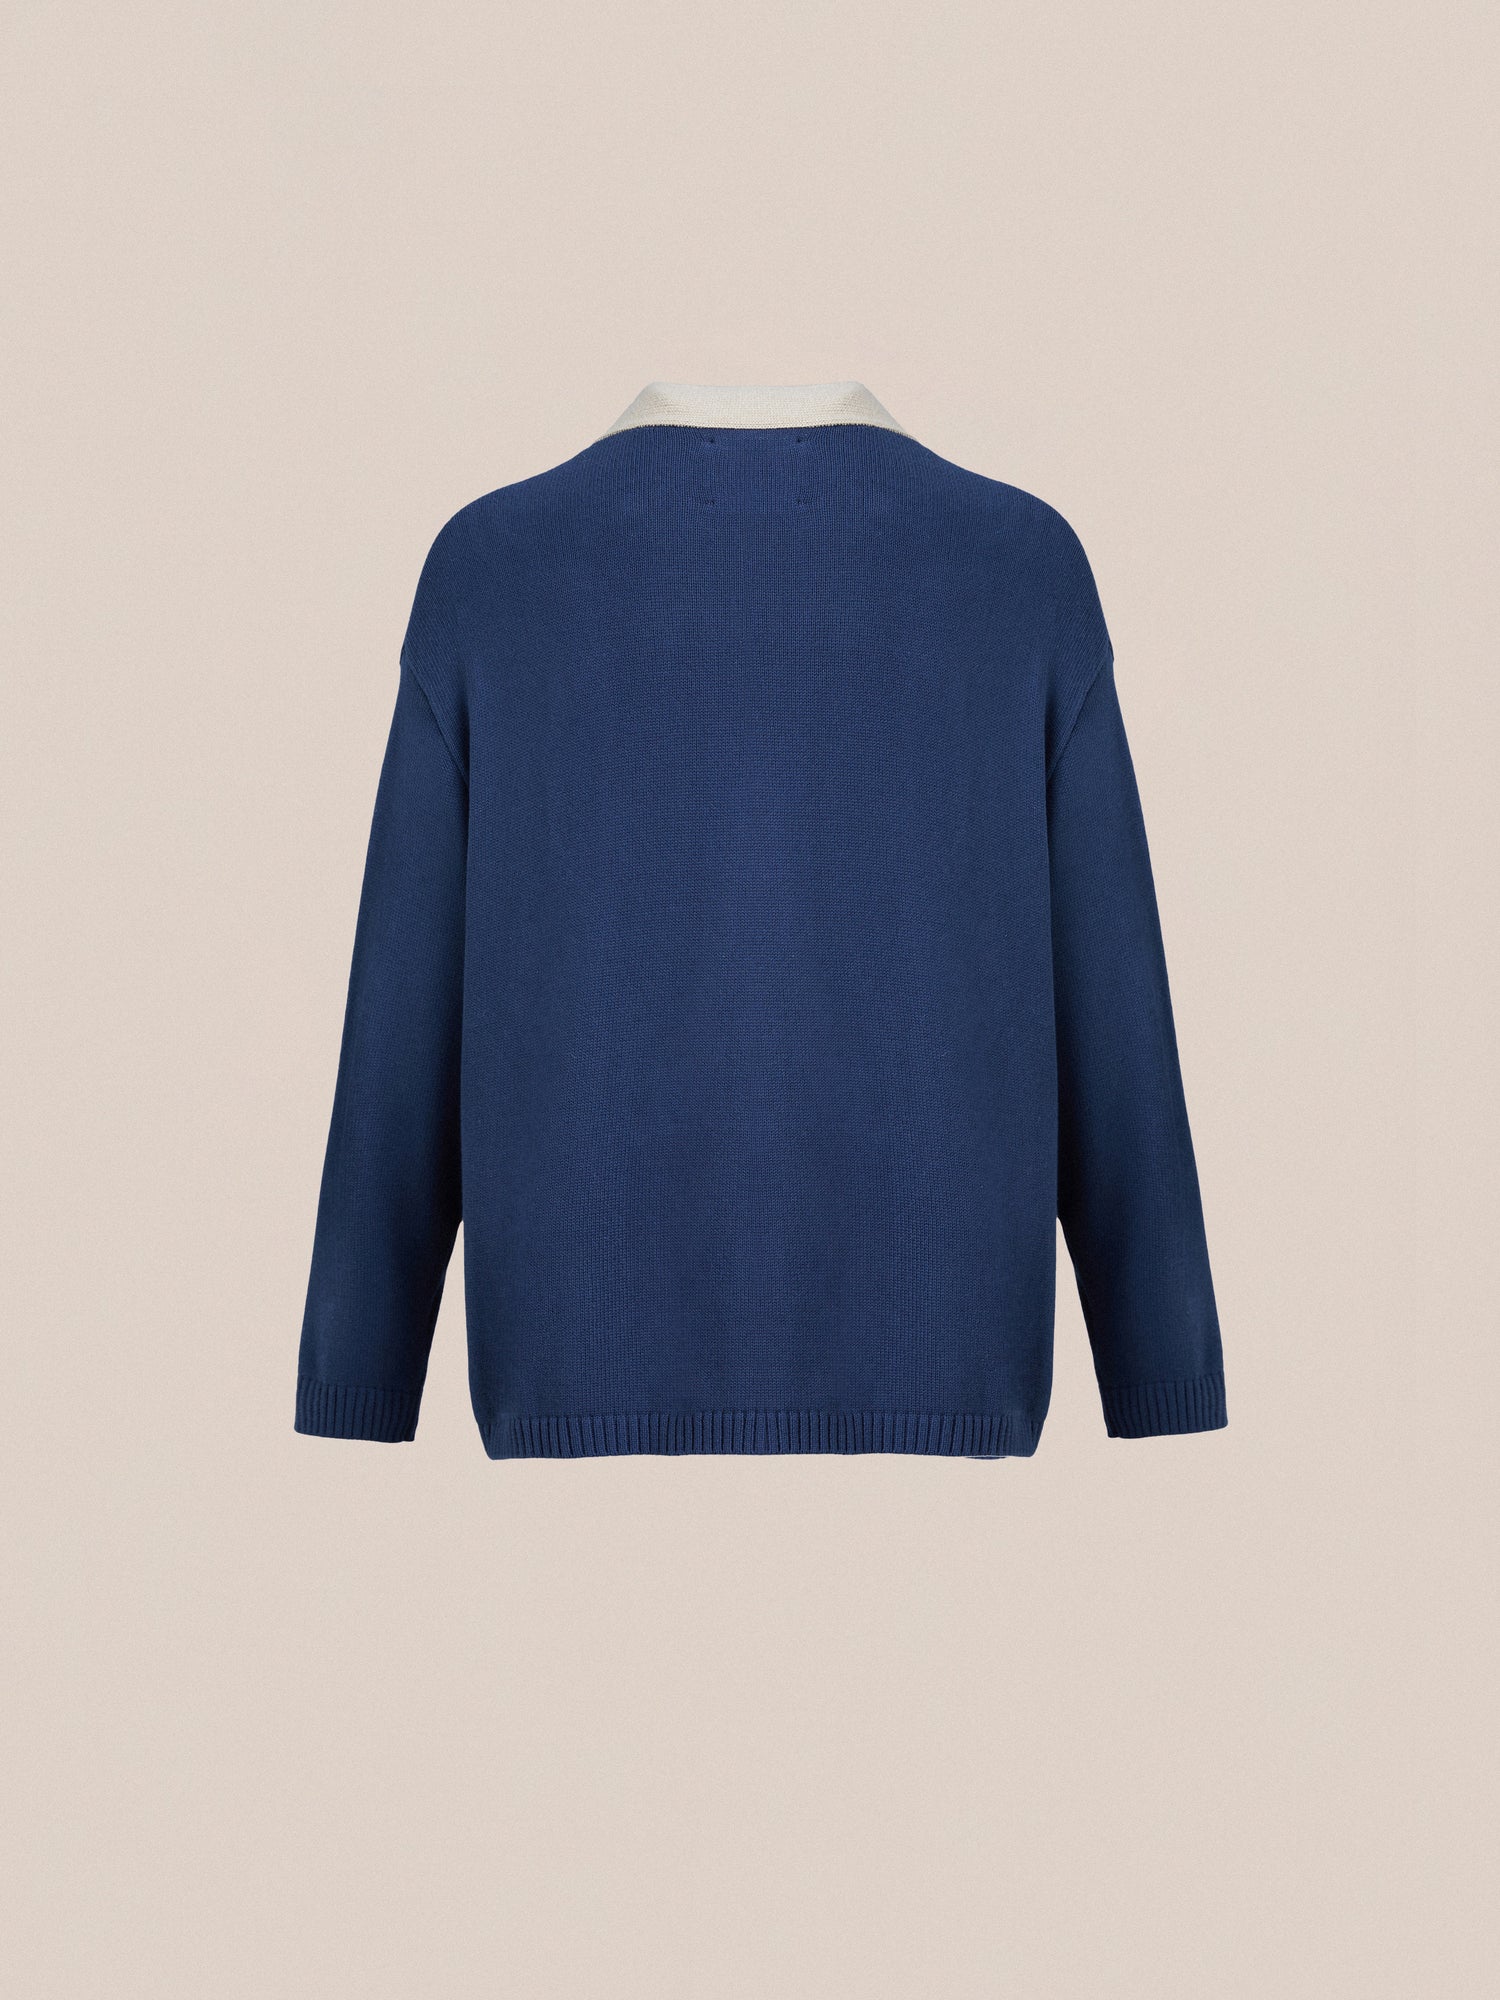 The back view of a blue Found Laleh Varsity Contrast Cardigan.